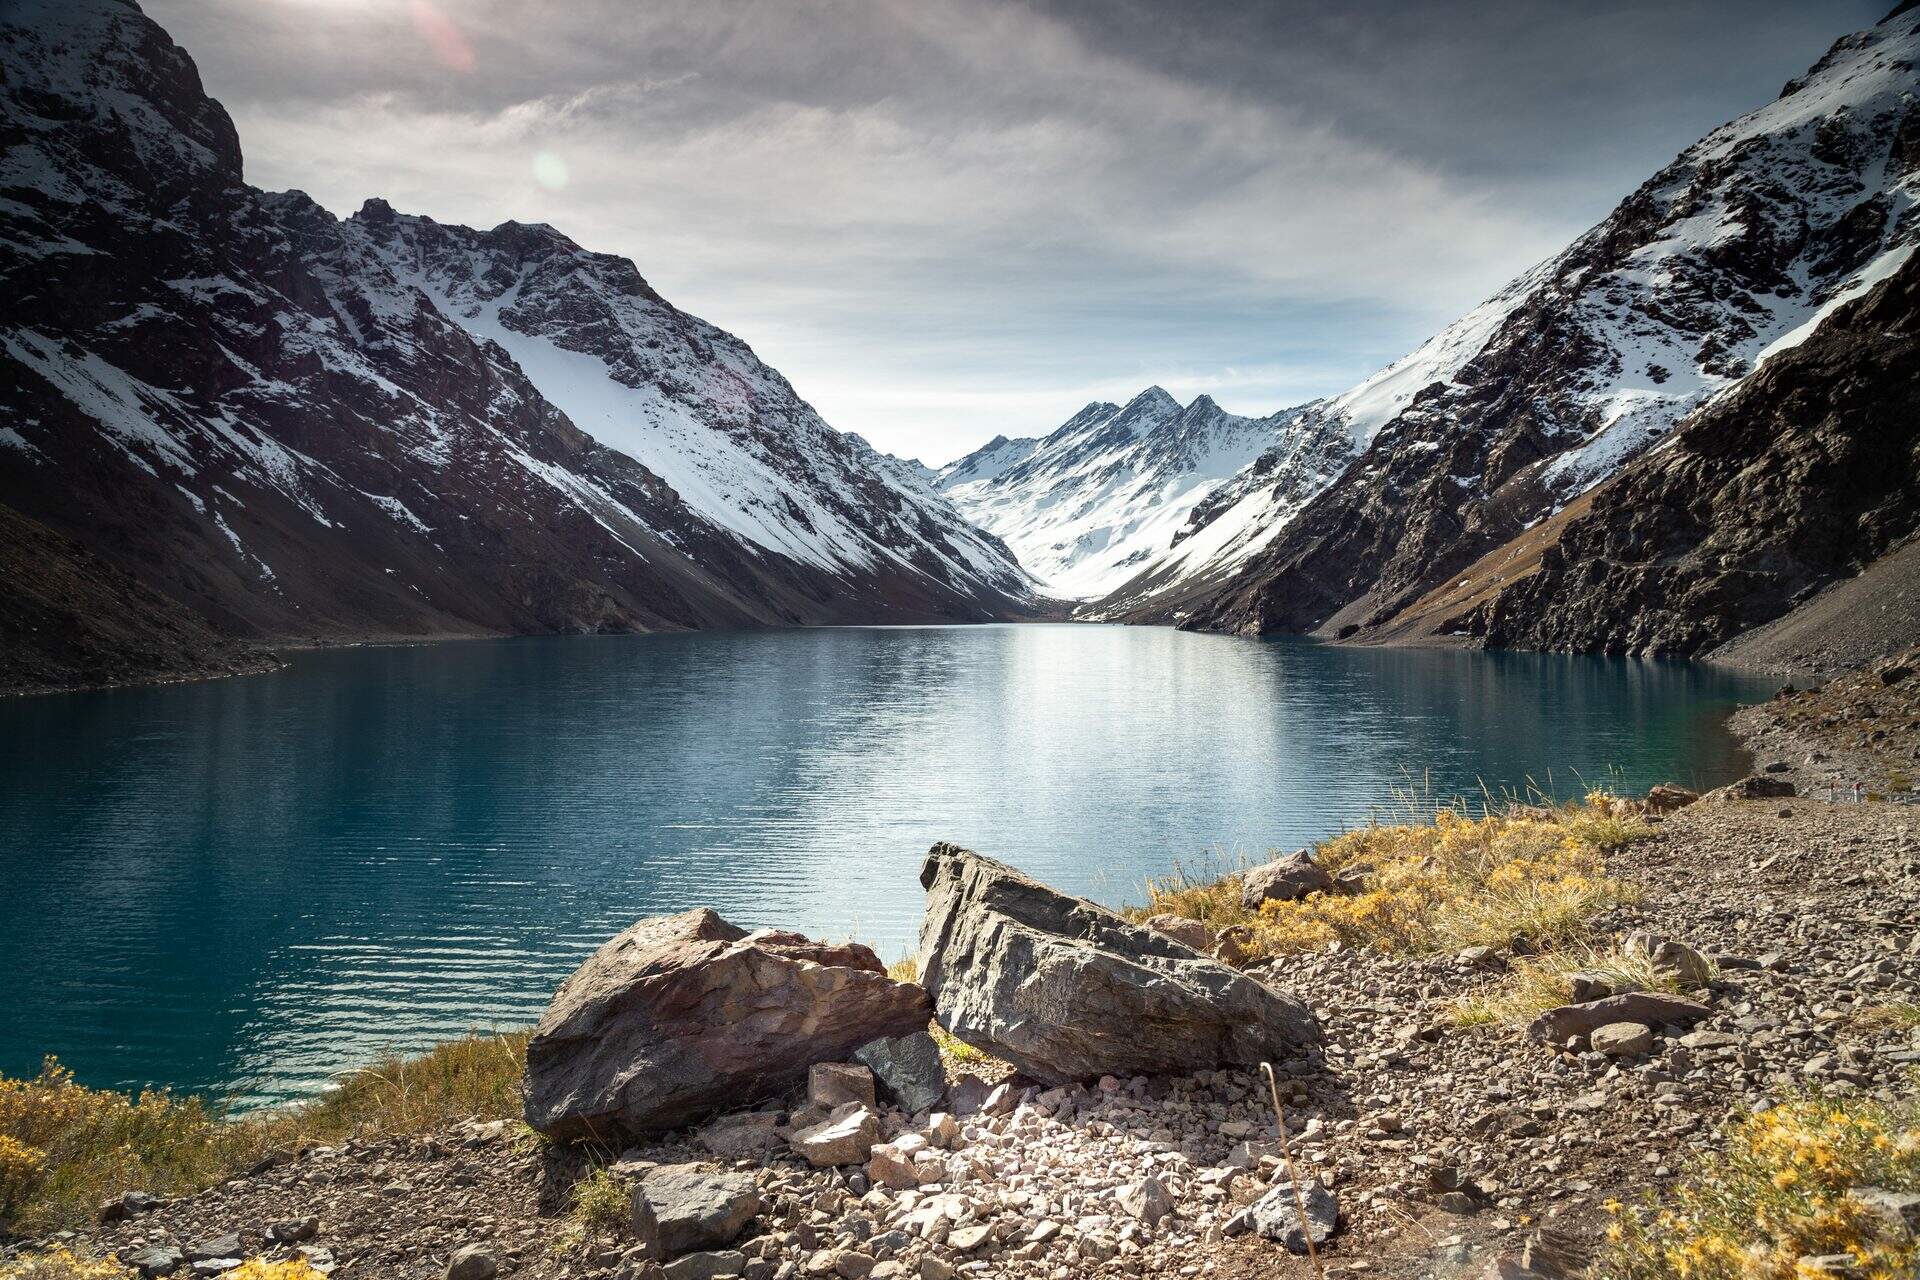 Laguna del Inca lake surrounded by high mountains covered in snow in Chile